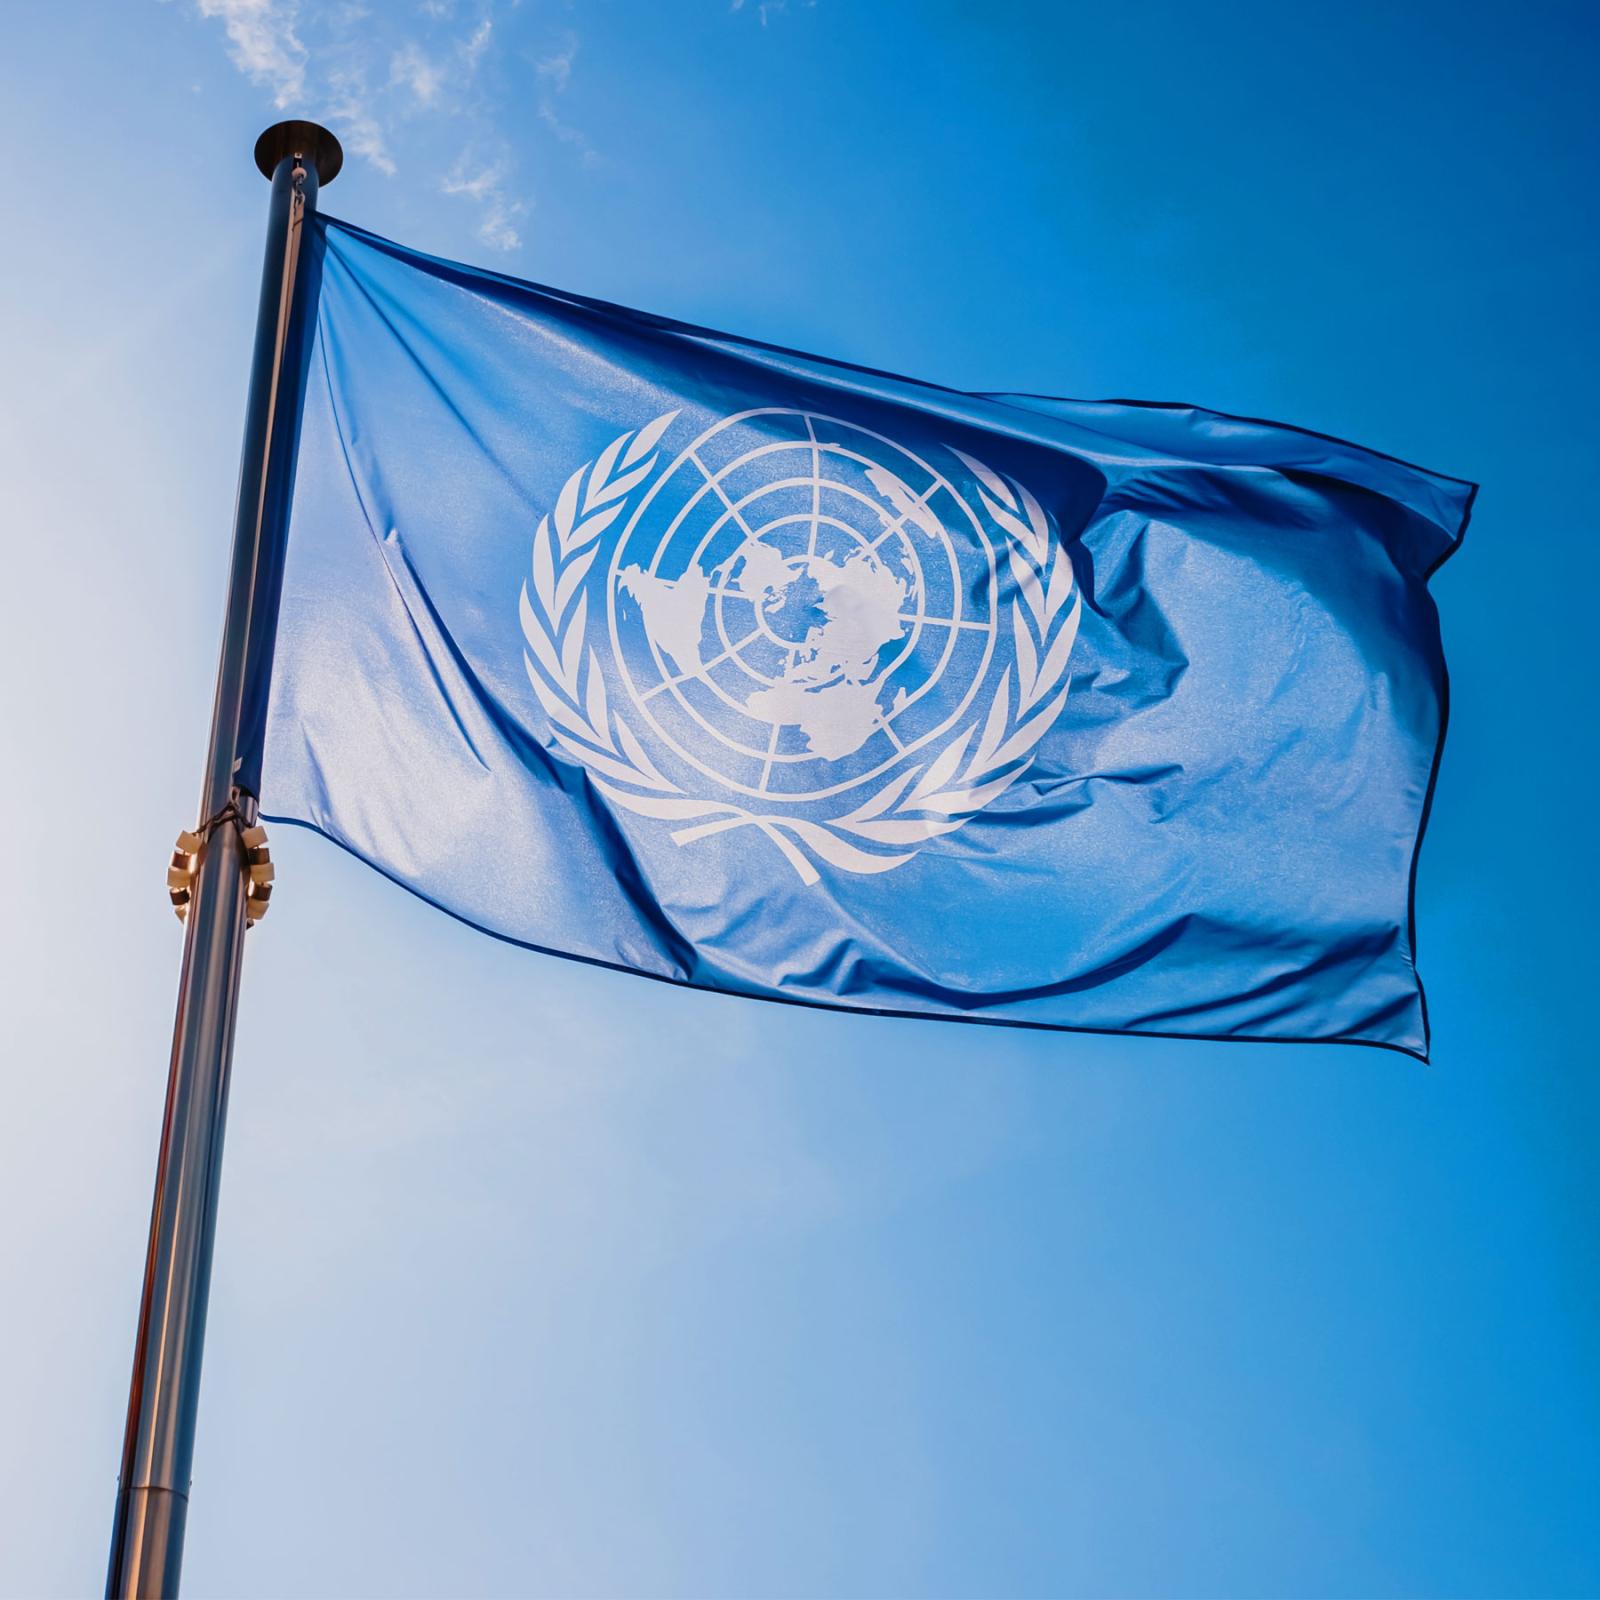 United Nations flag against a blue sky